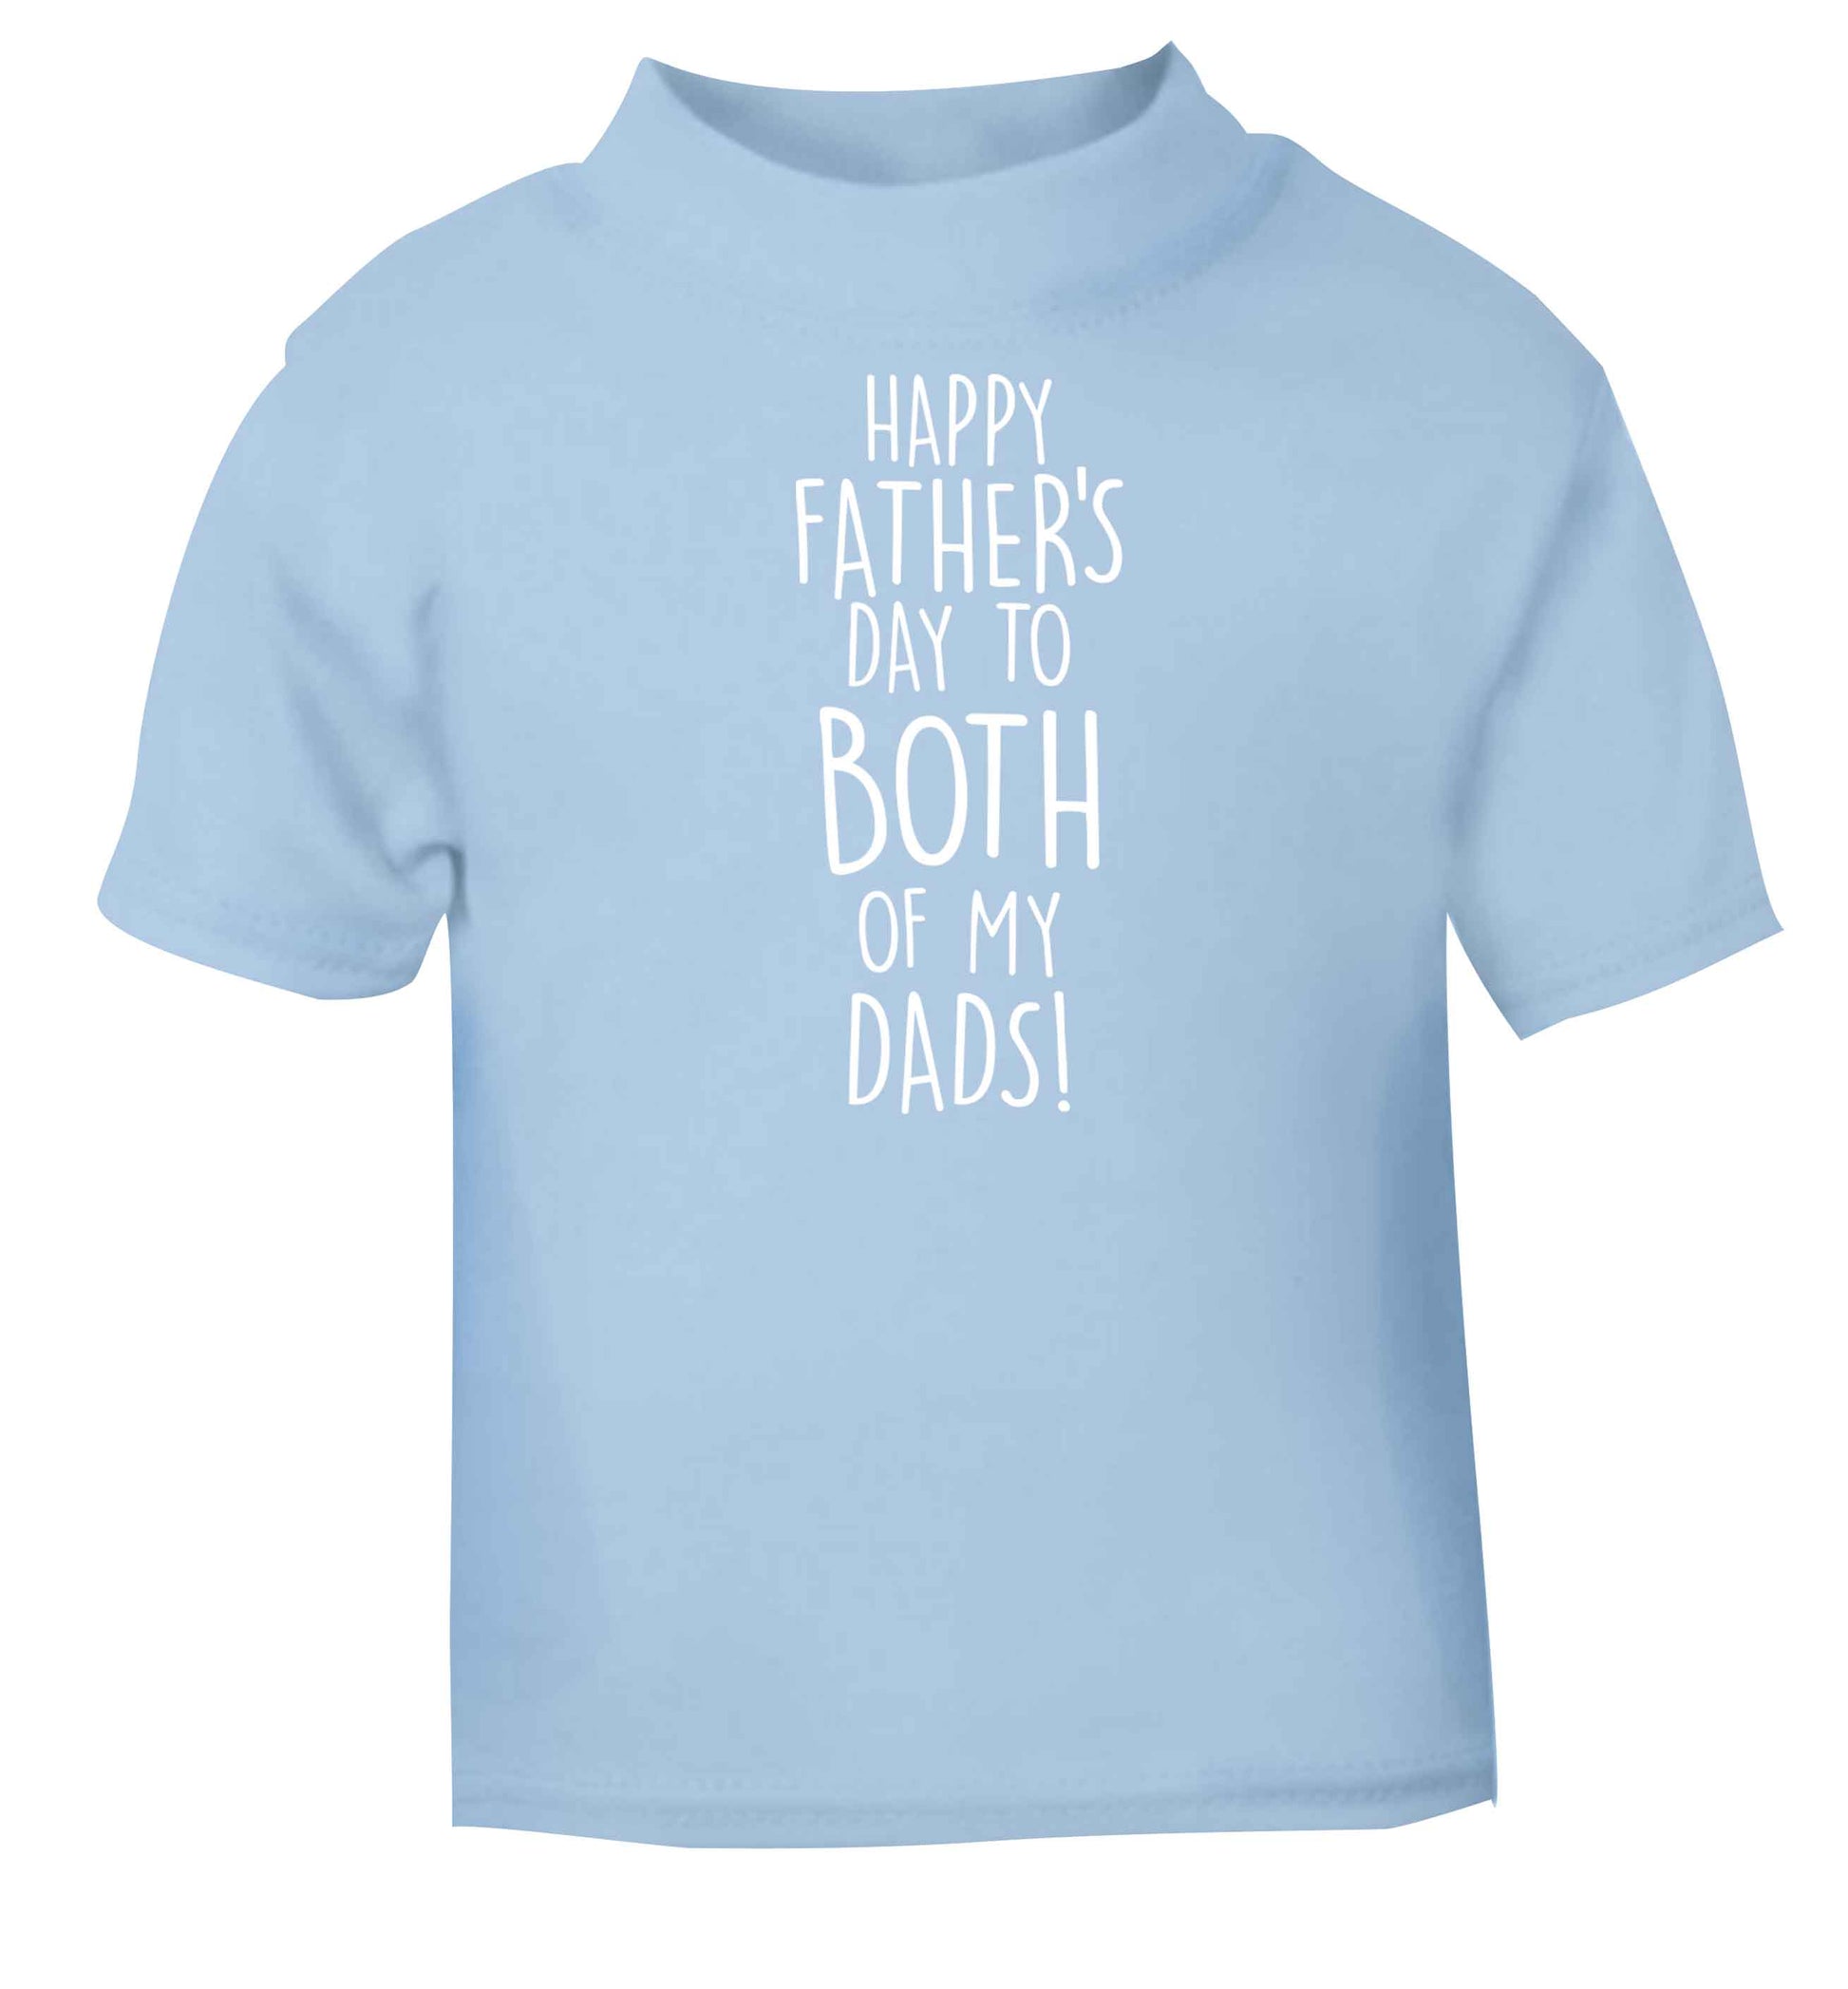 Happy Father's day to both of my dads light blue baby toddler Tshirt 2 Years